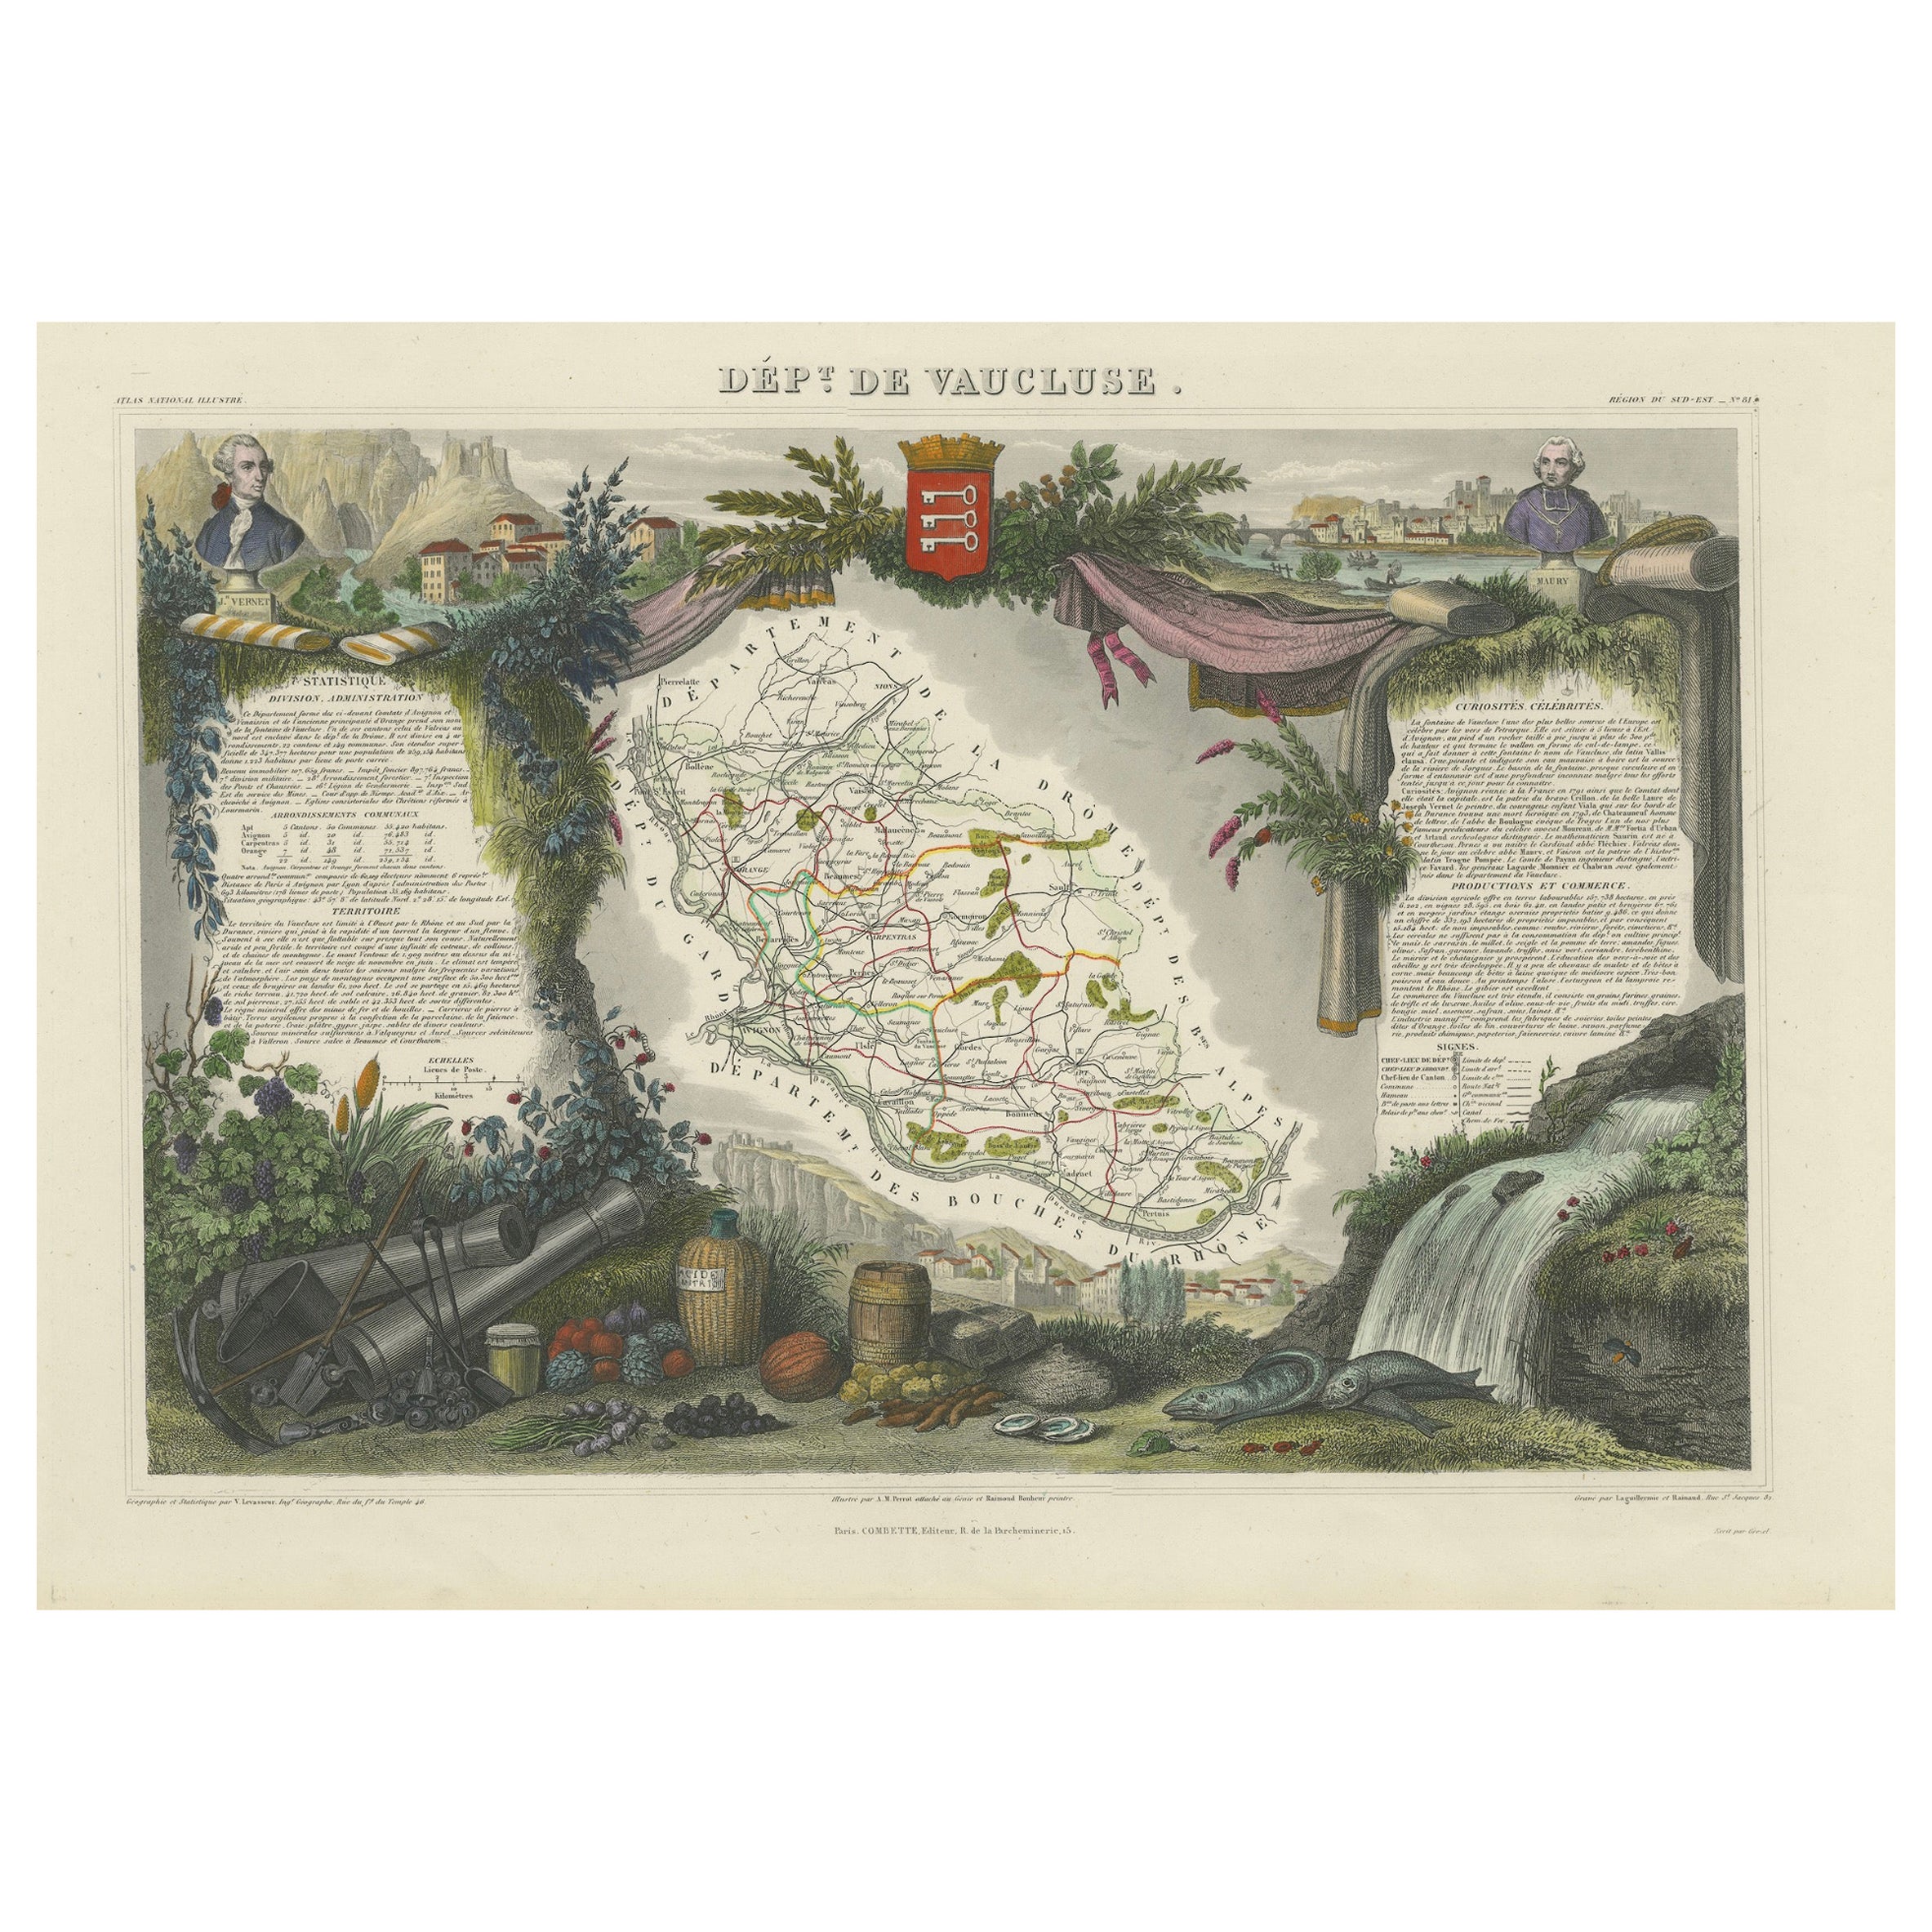 Old Map of Vaucluse, France : A Cartographic Celebration of Viticulture, 1852 en vente